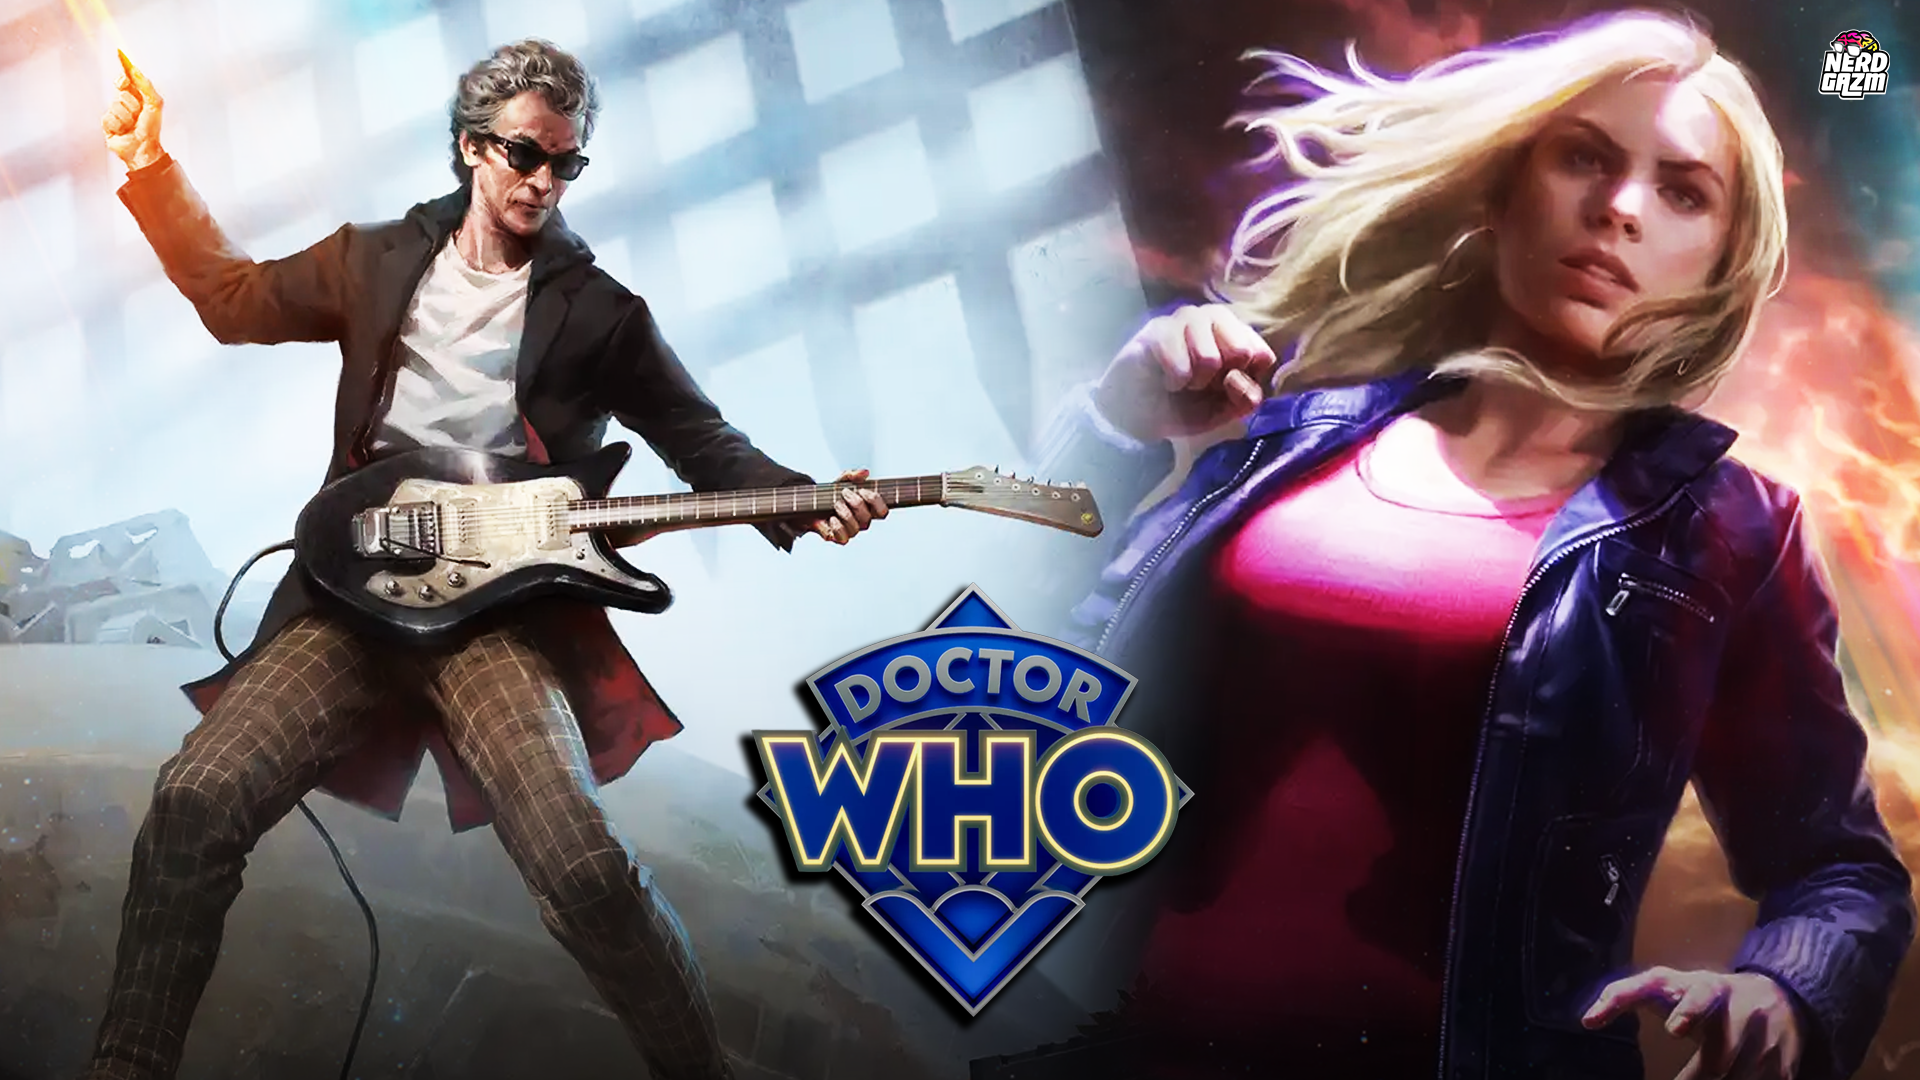 Magic: The Gathering Launches 'Doctor Who' Expansion